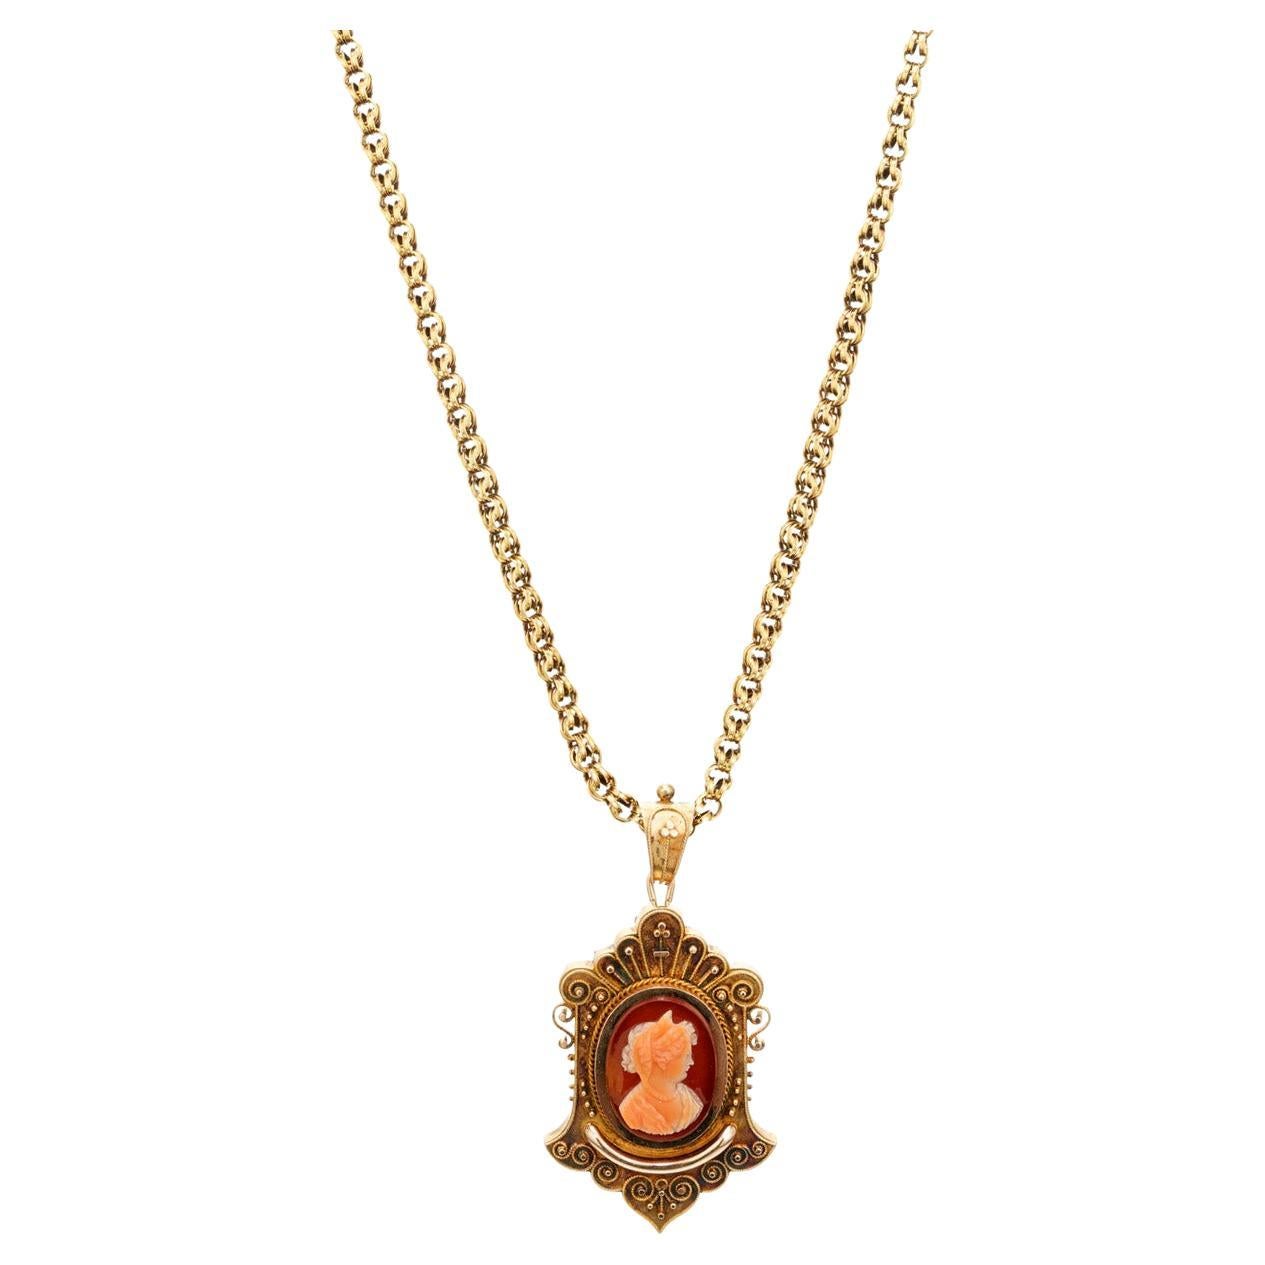 Victorian 1845 Carnelian Hardstone Yellow Gold Cameo Brooch Pendant Necklace